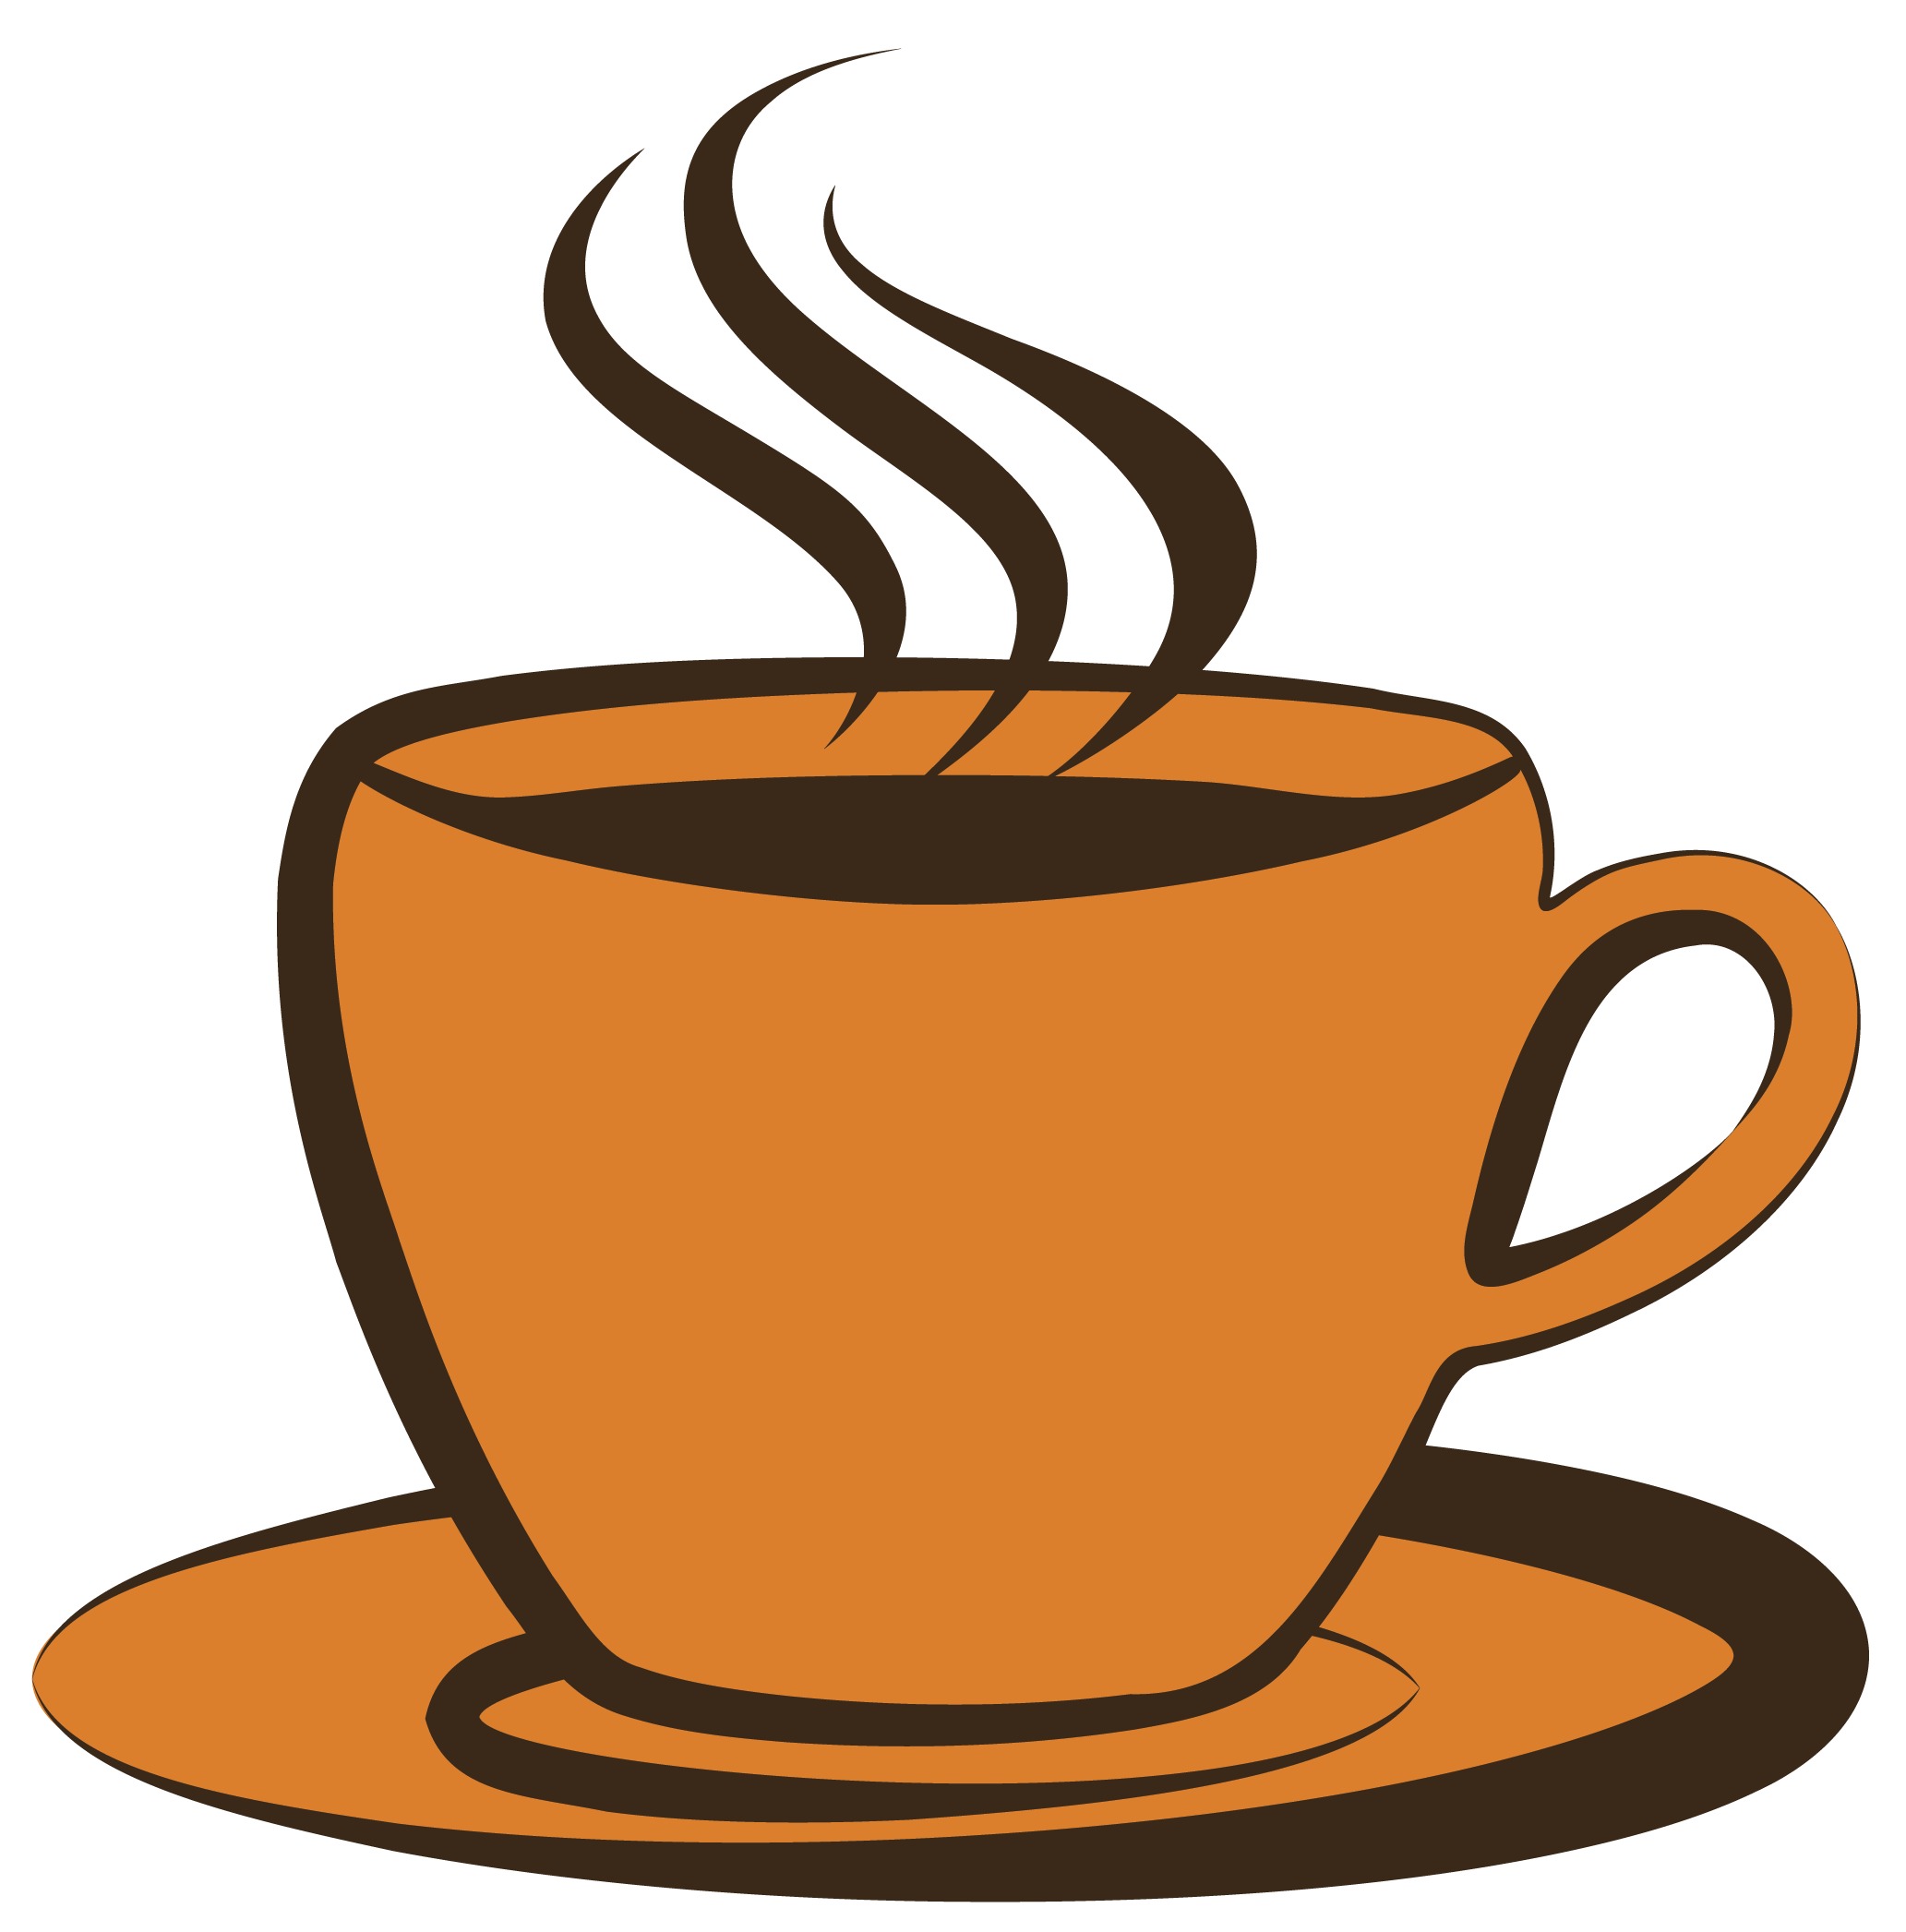 Coffee clipart on clip art co